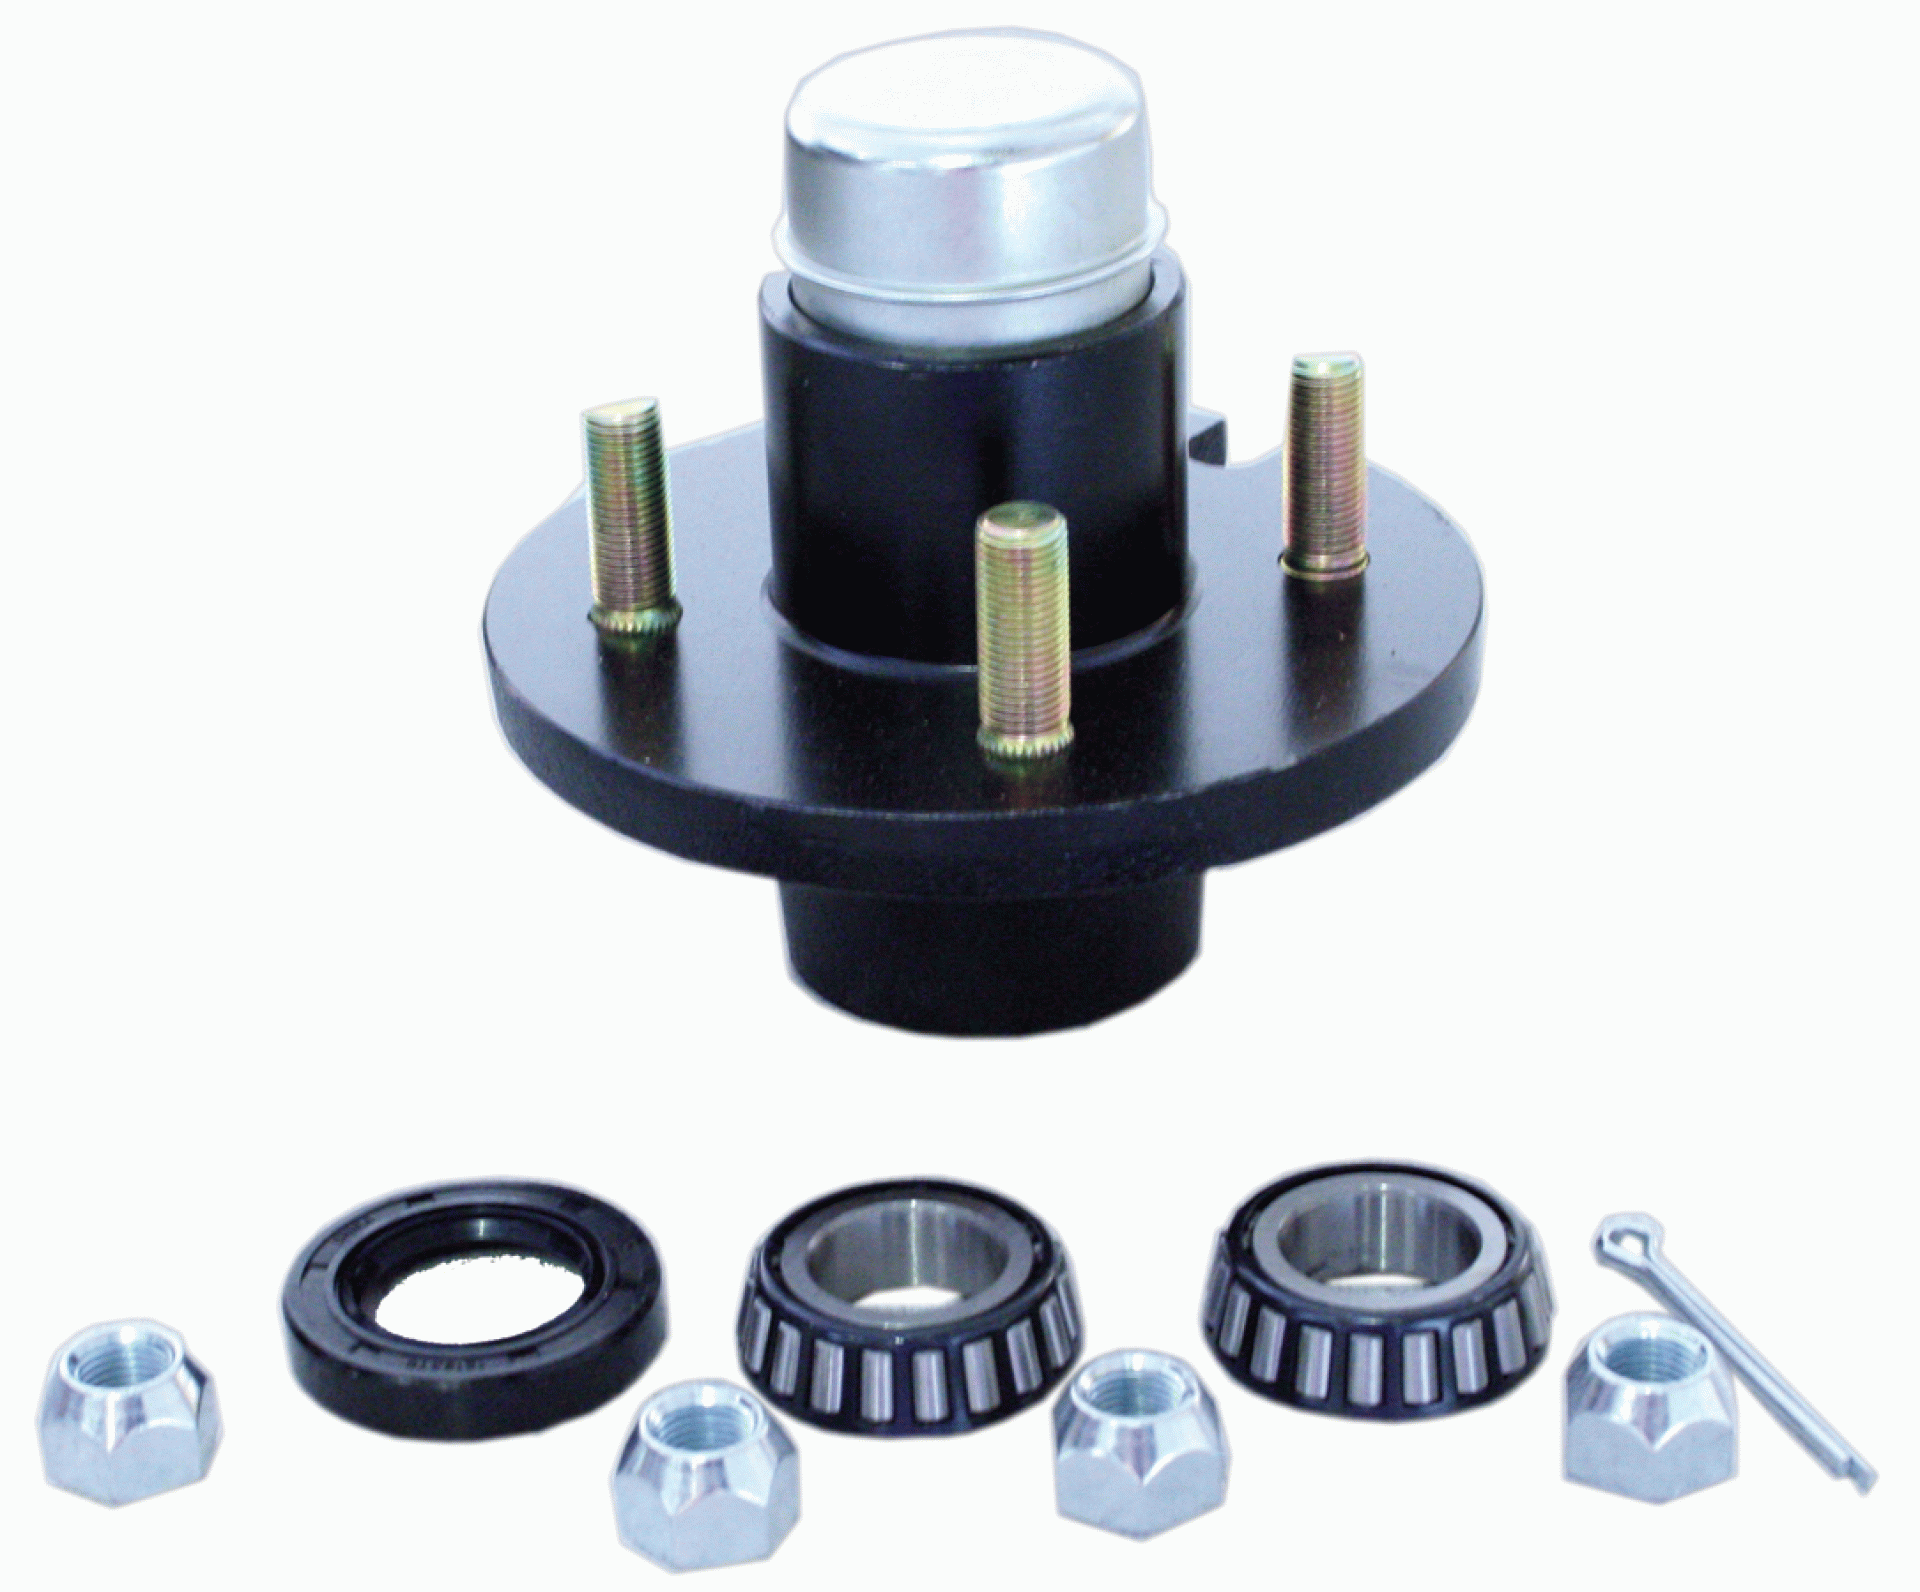 DEXTER MARINE PRODUCTS OF GEORGIA LC | 81062 | 1" SPINDLE 440 1250 LB. CAPACITY - 4 LUG HUB BOXED COMPLETE